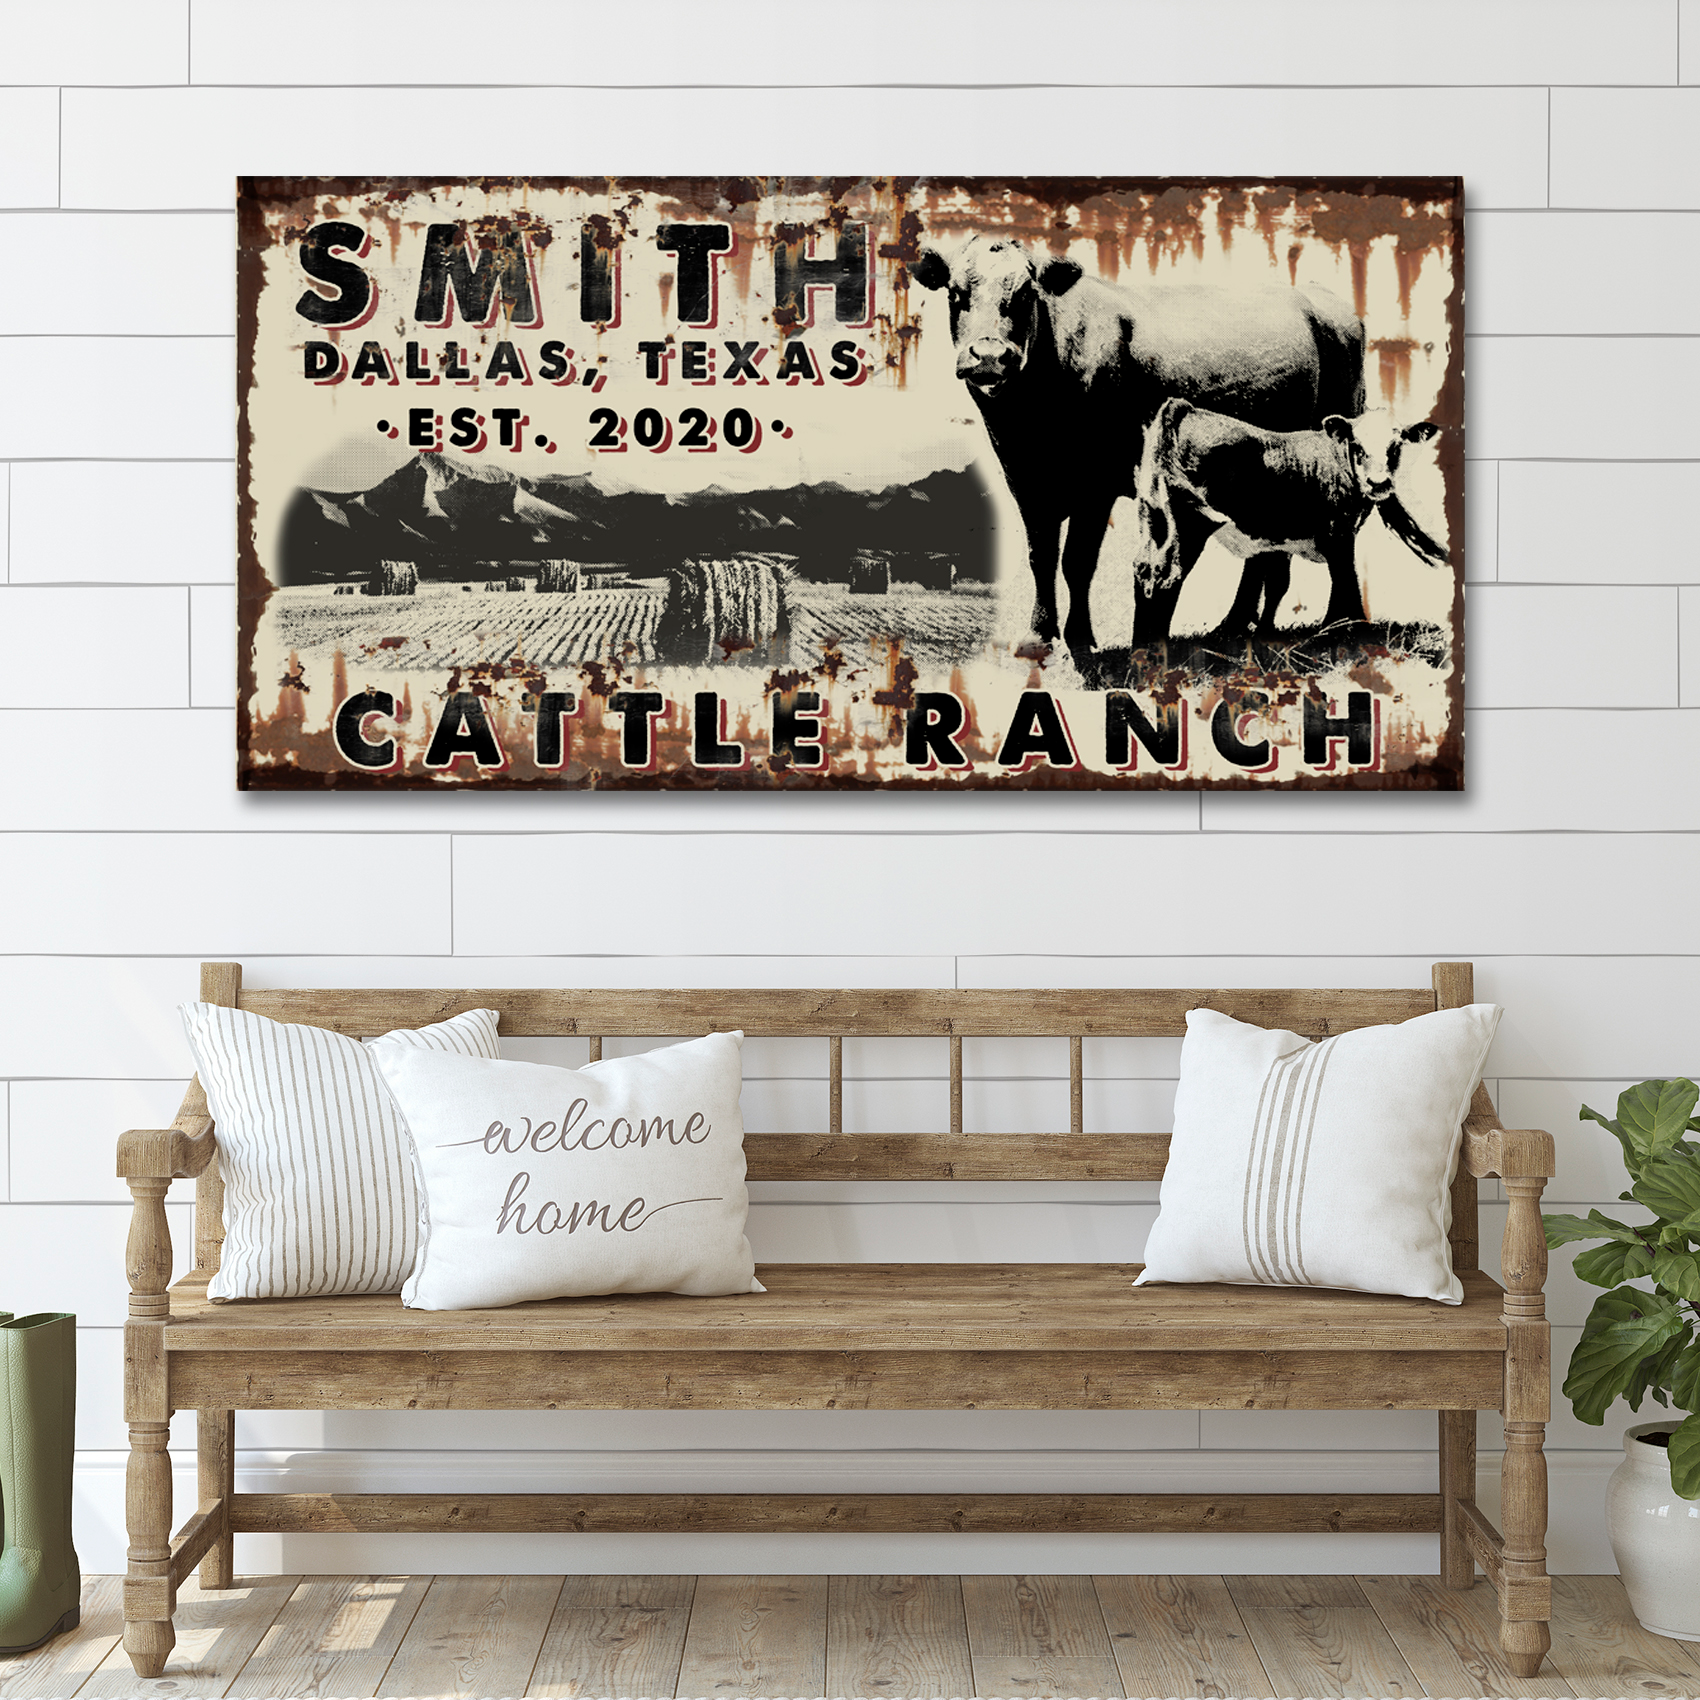 Cattle Ranch Vintage Sign - Image by Tailored Canvases